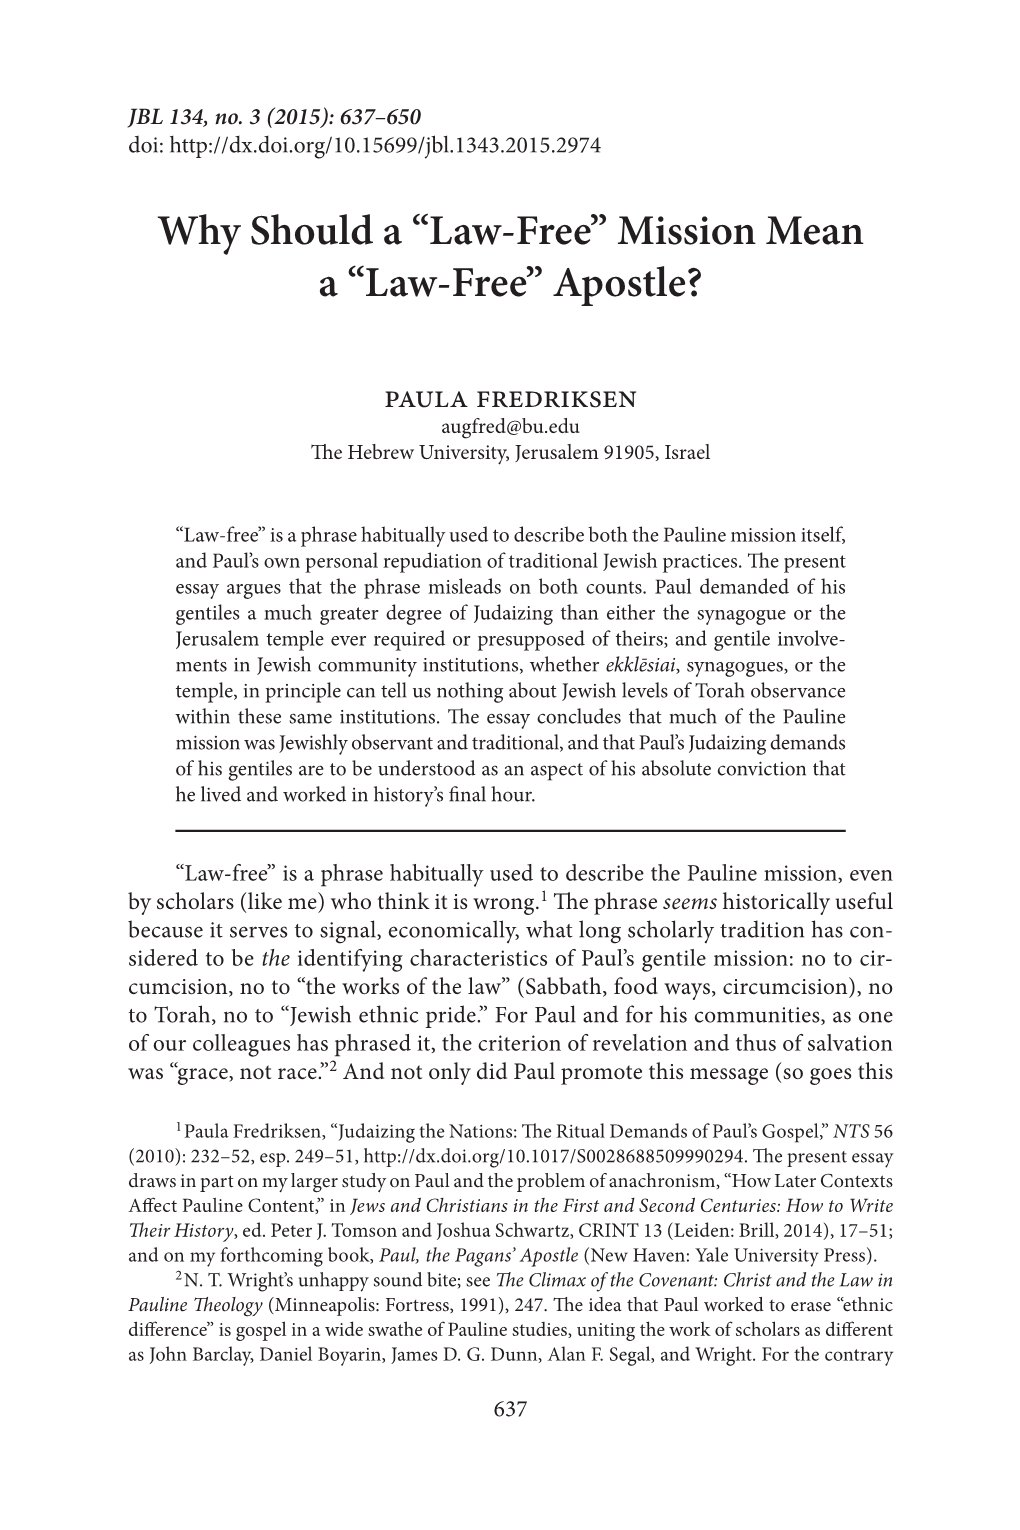 Why Should a “Law-Free” Mission Mean a “Law-Free” Apostle?